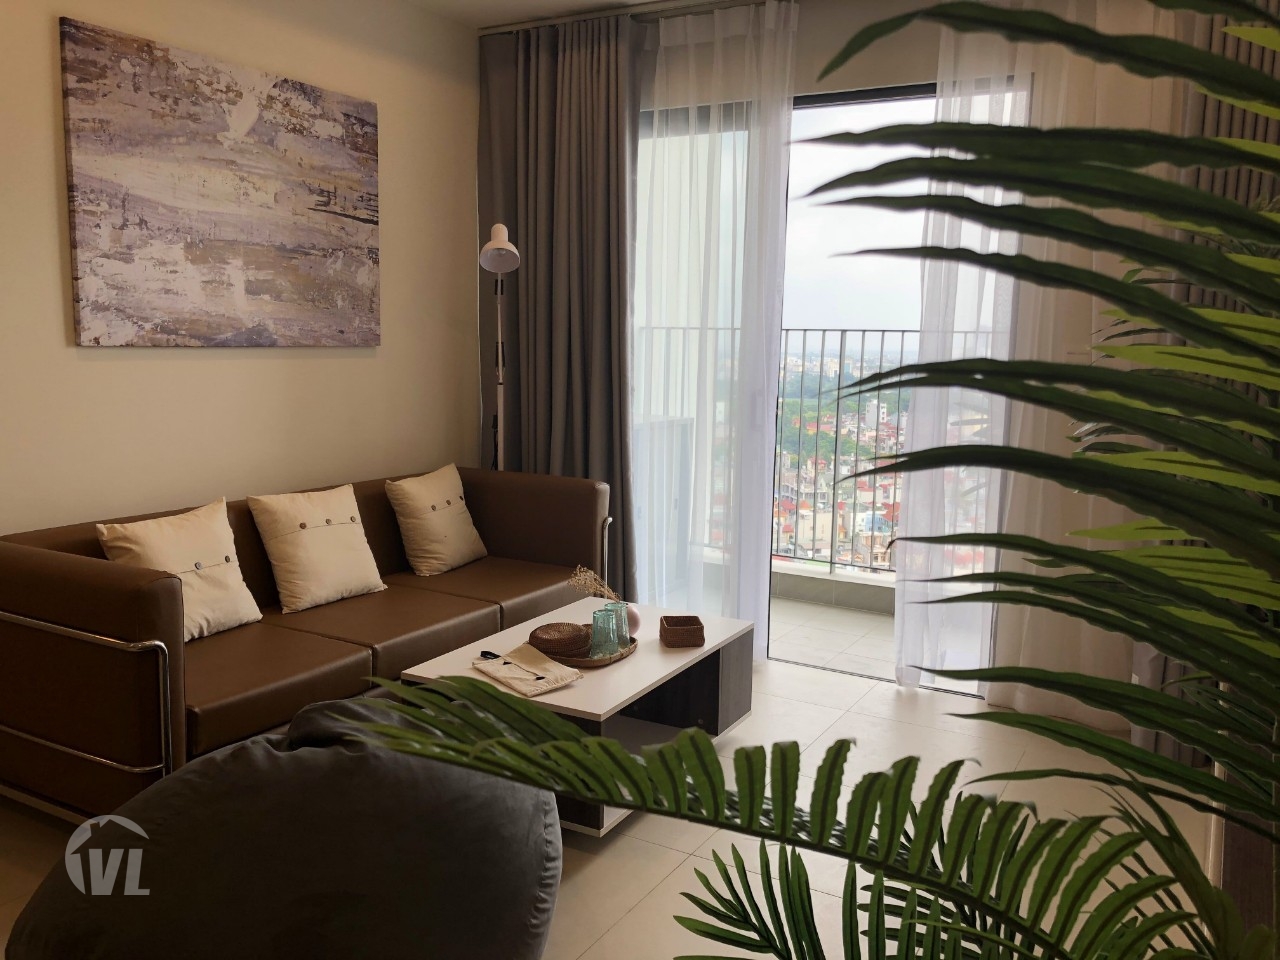 333 Kosmo 2 bedroom furnished apartment, modern and bright